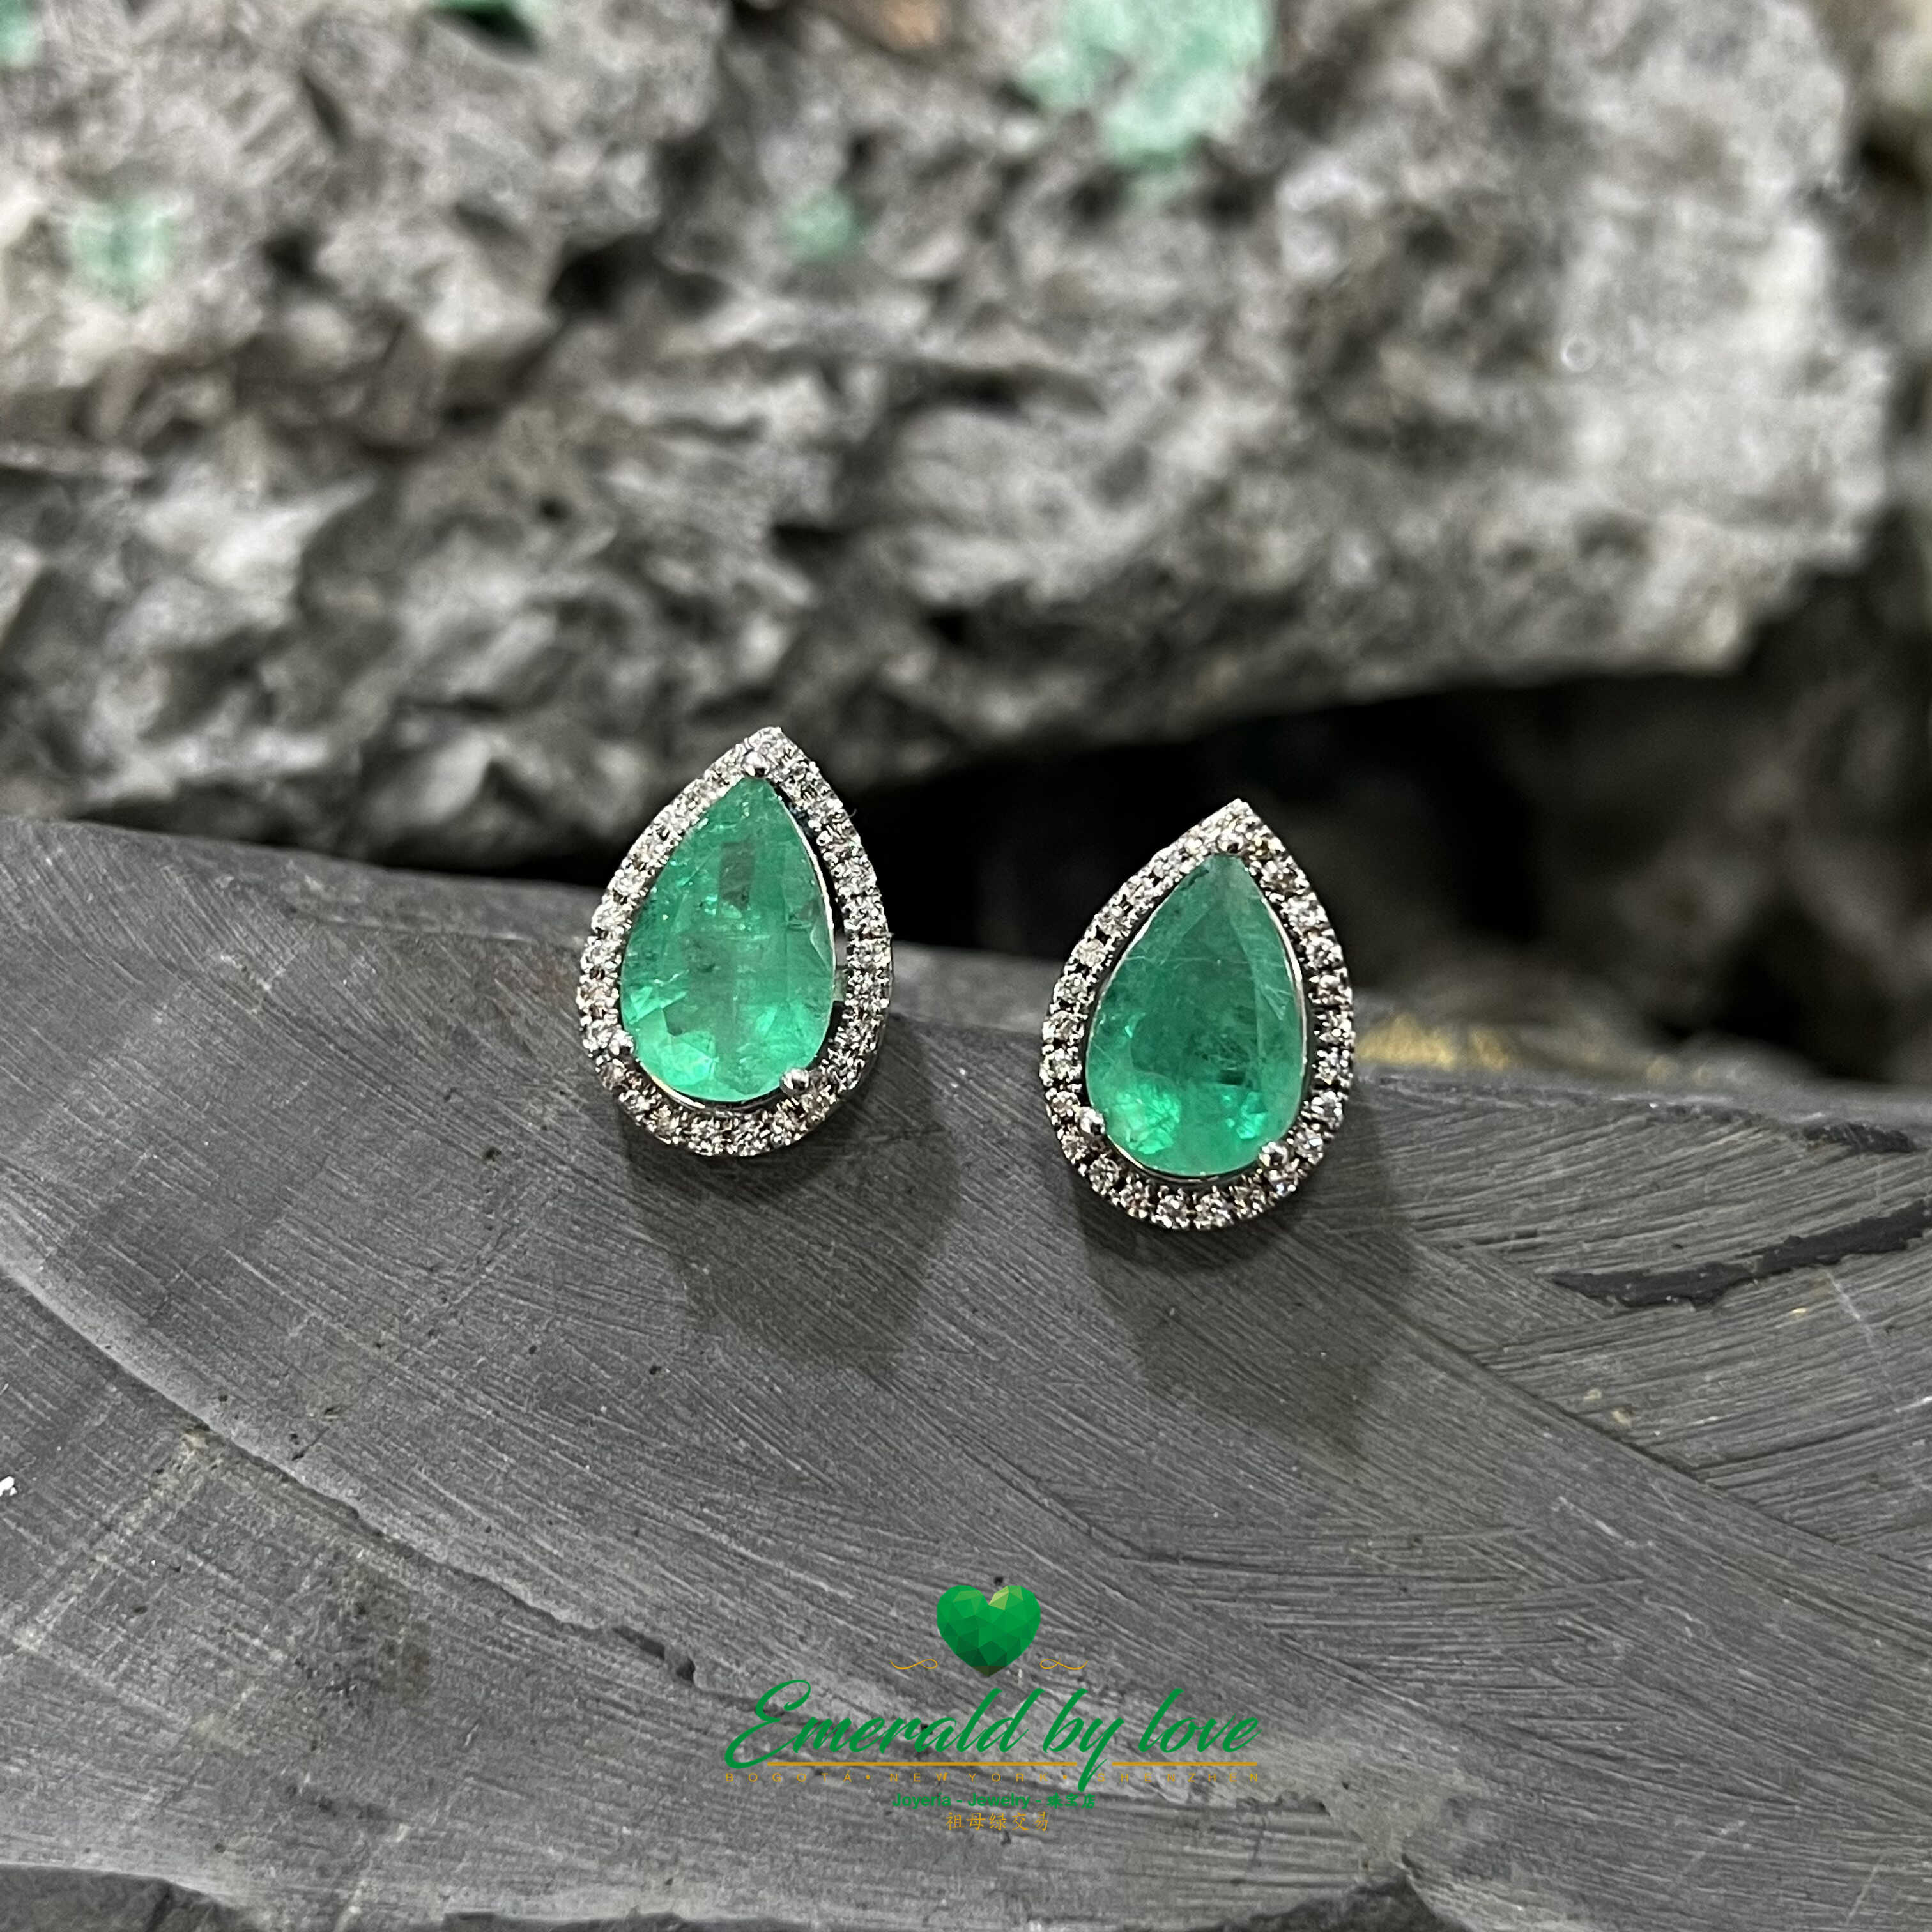 Stunning White Gold Marquise Earrings: 6.36 TCW Tear-Drop Emeralds, 0.52 CT Diamonds